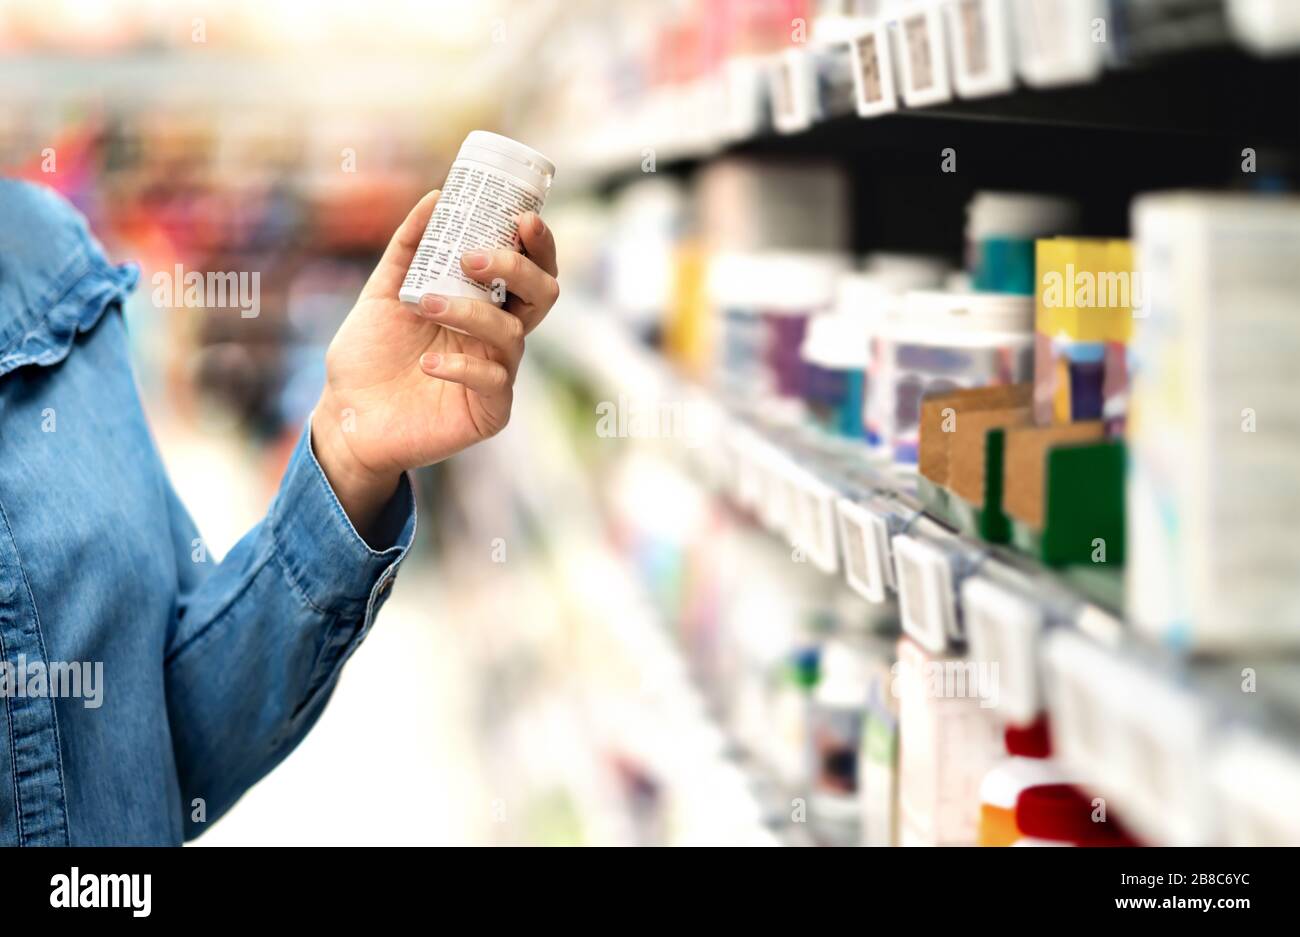 Customer in pharmacy holding medicine bottle. Woman reading the label text about medical information or side effects in drug store. Patient shopping. Stock Photo